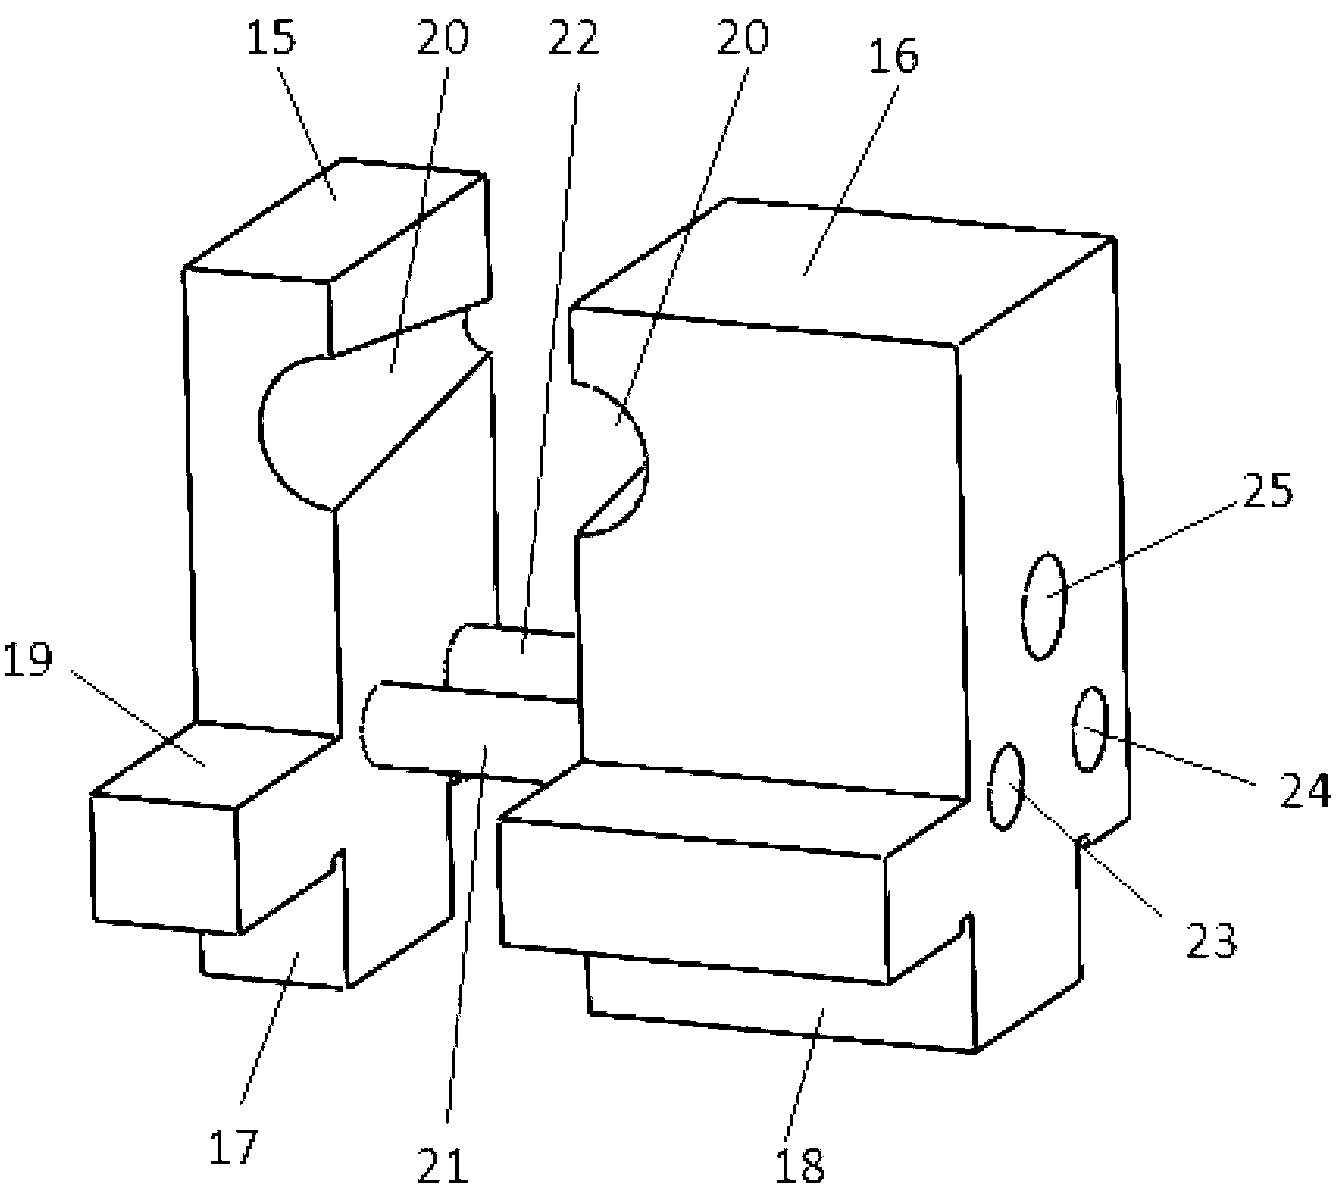 Threading guide device for double-end crimping